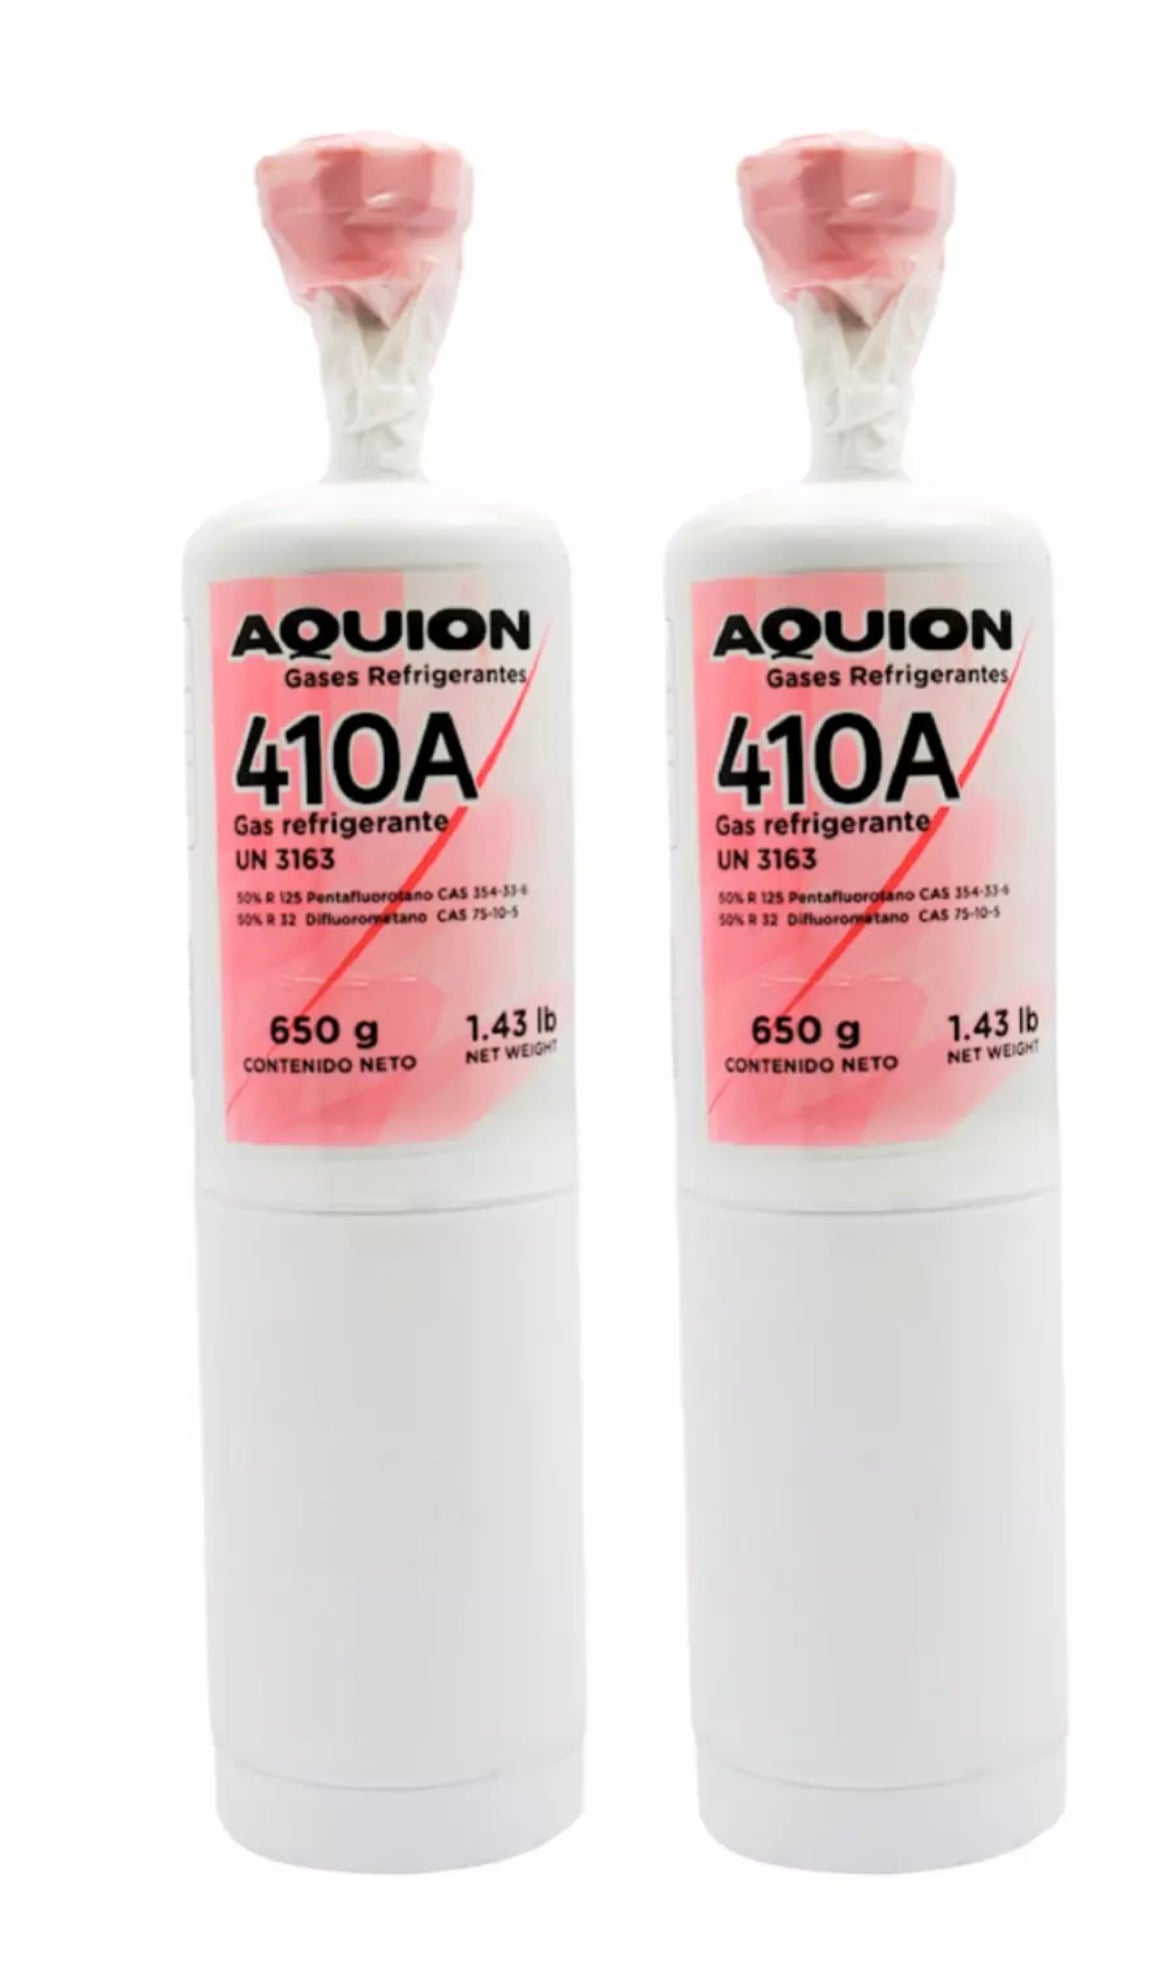 R410a REFRIGERANT 2.86 LBS (46oz) FAST SHIPPING / VALVE INCLUDED! (2 CANS)